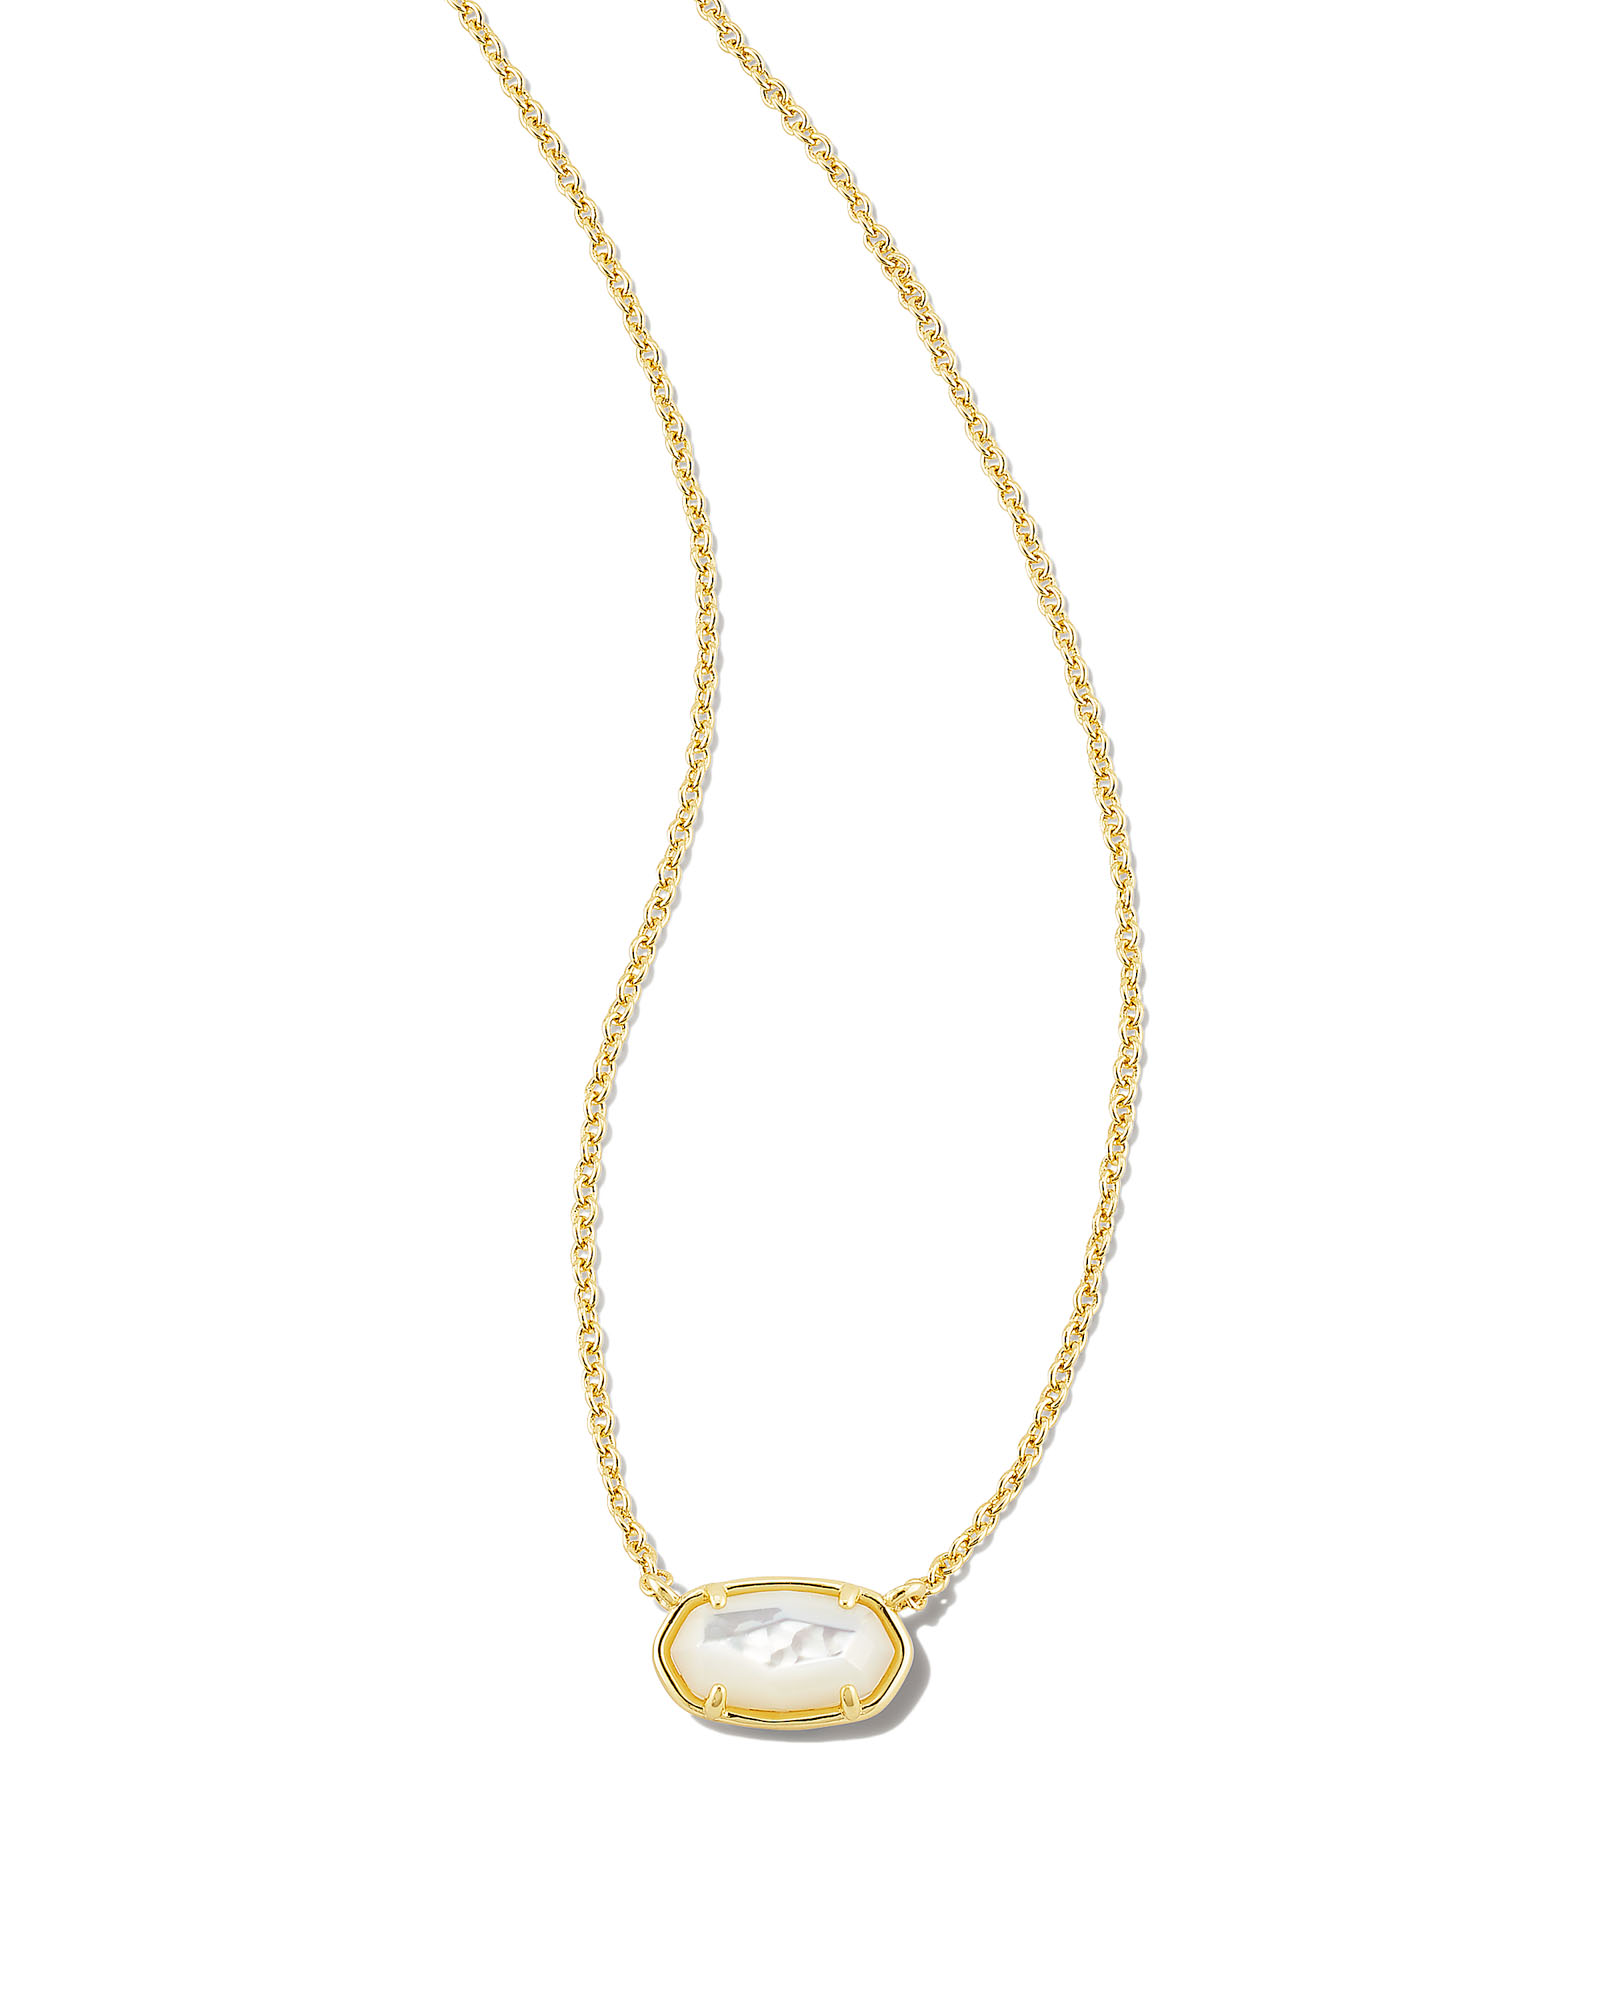 Kendra Scott Ever Necklace in Peach Mother-of-Pearl | REEDS Jewelers